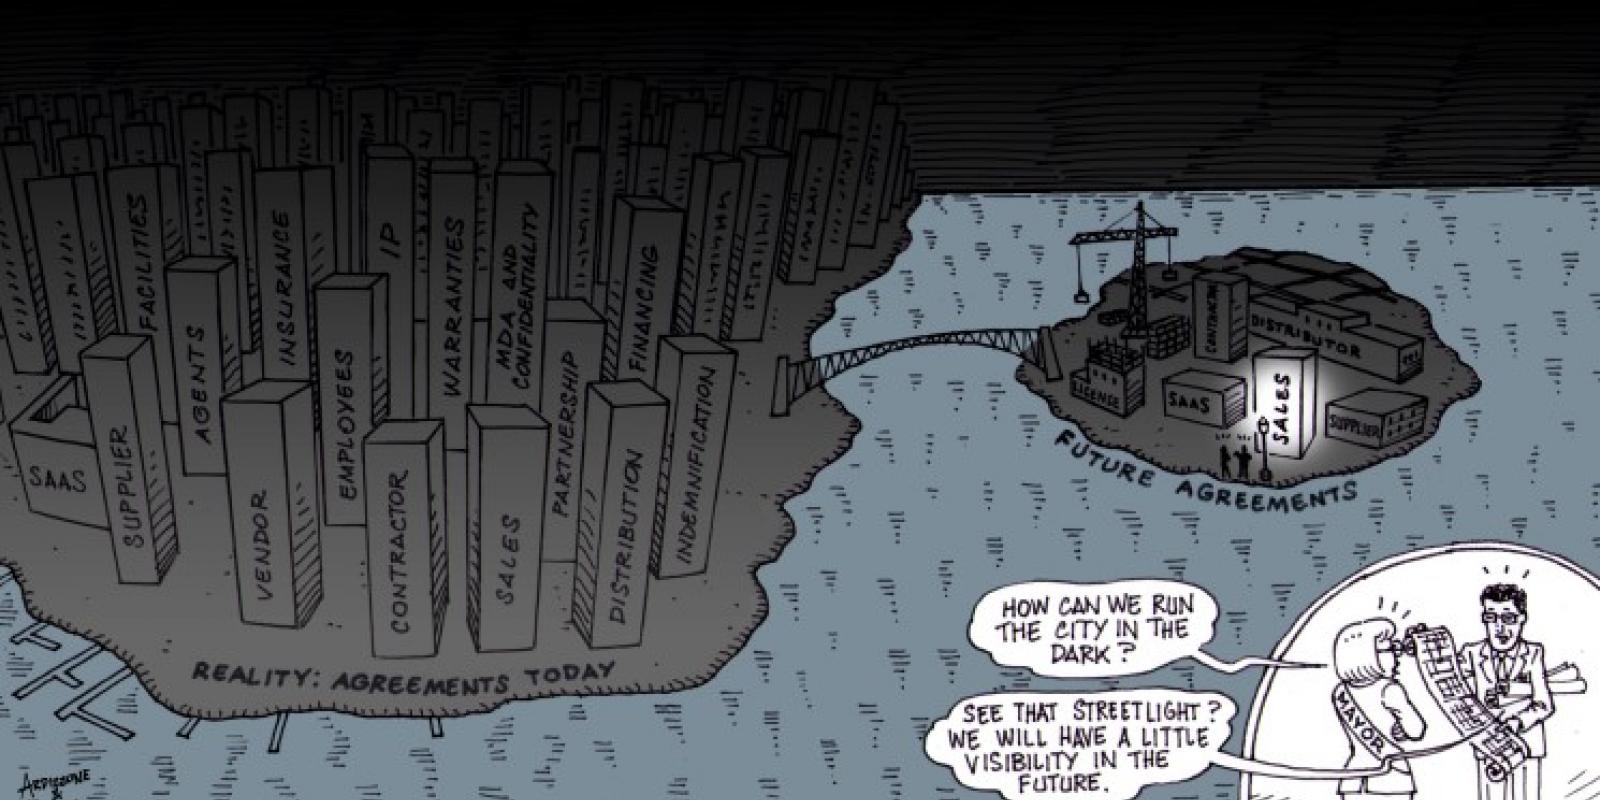 Cartoon of a city labelled "agreements today" with a bridge to an island labelled "future agreements" with the mayor and a city planner saying "how can we run the city in the dark?" "See that streetlight? We'll have a little visibility in the future."